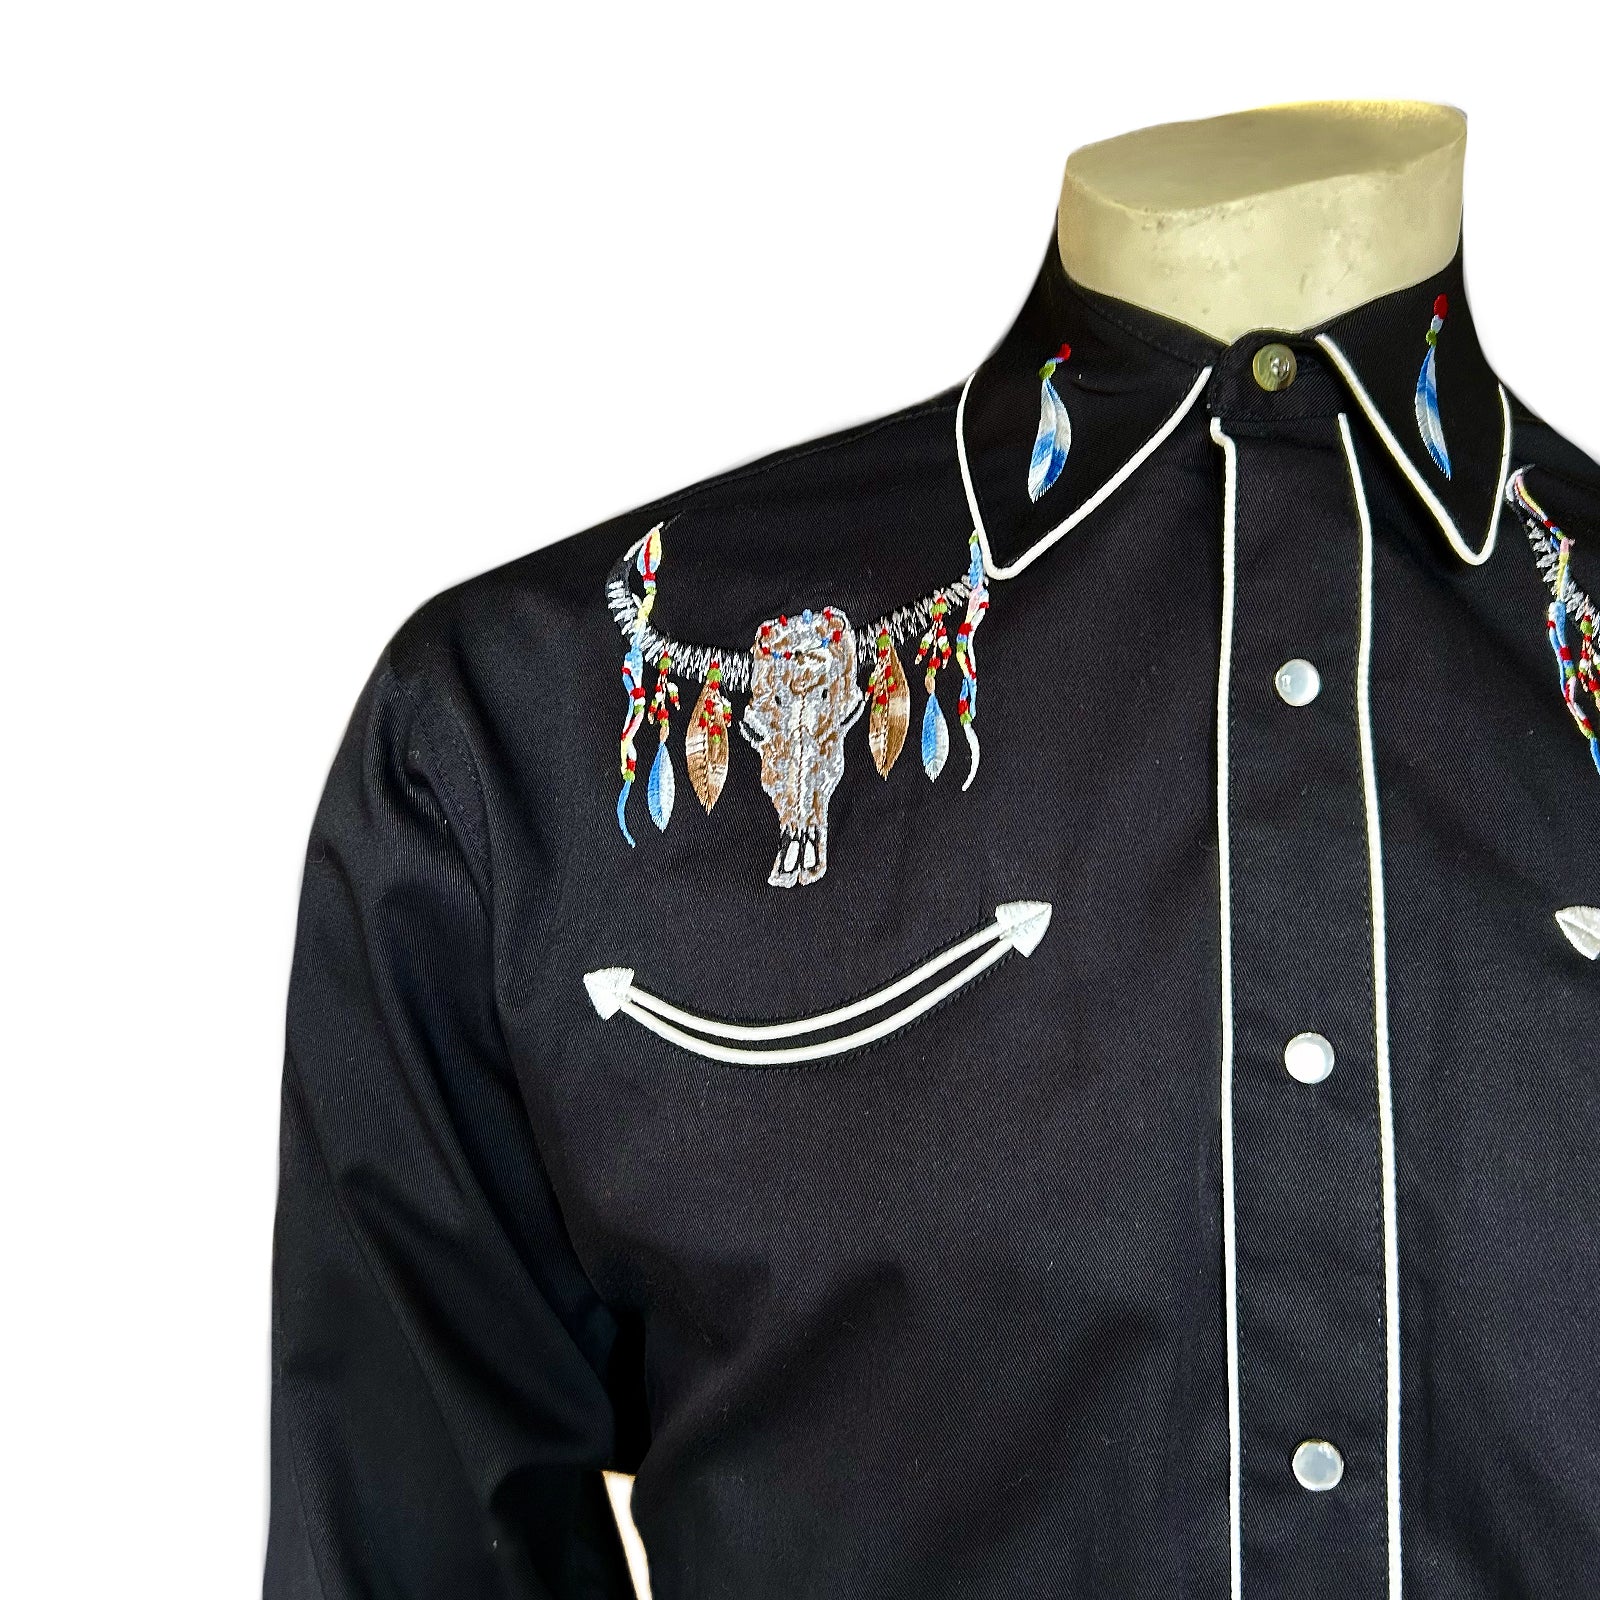 Men's Steer Skulls with Feathers Embroidered Western Shirt in Black